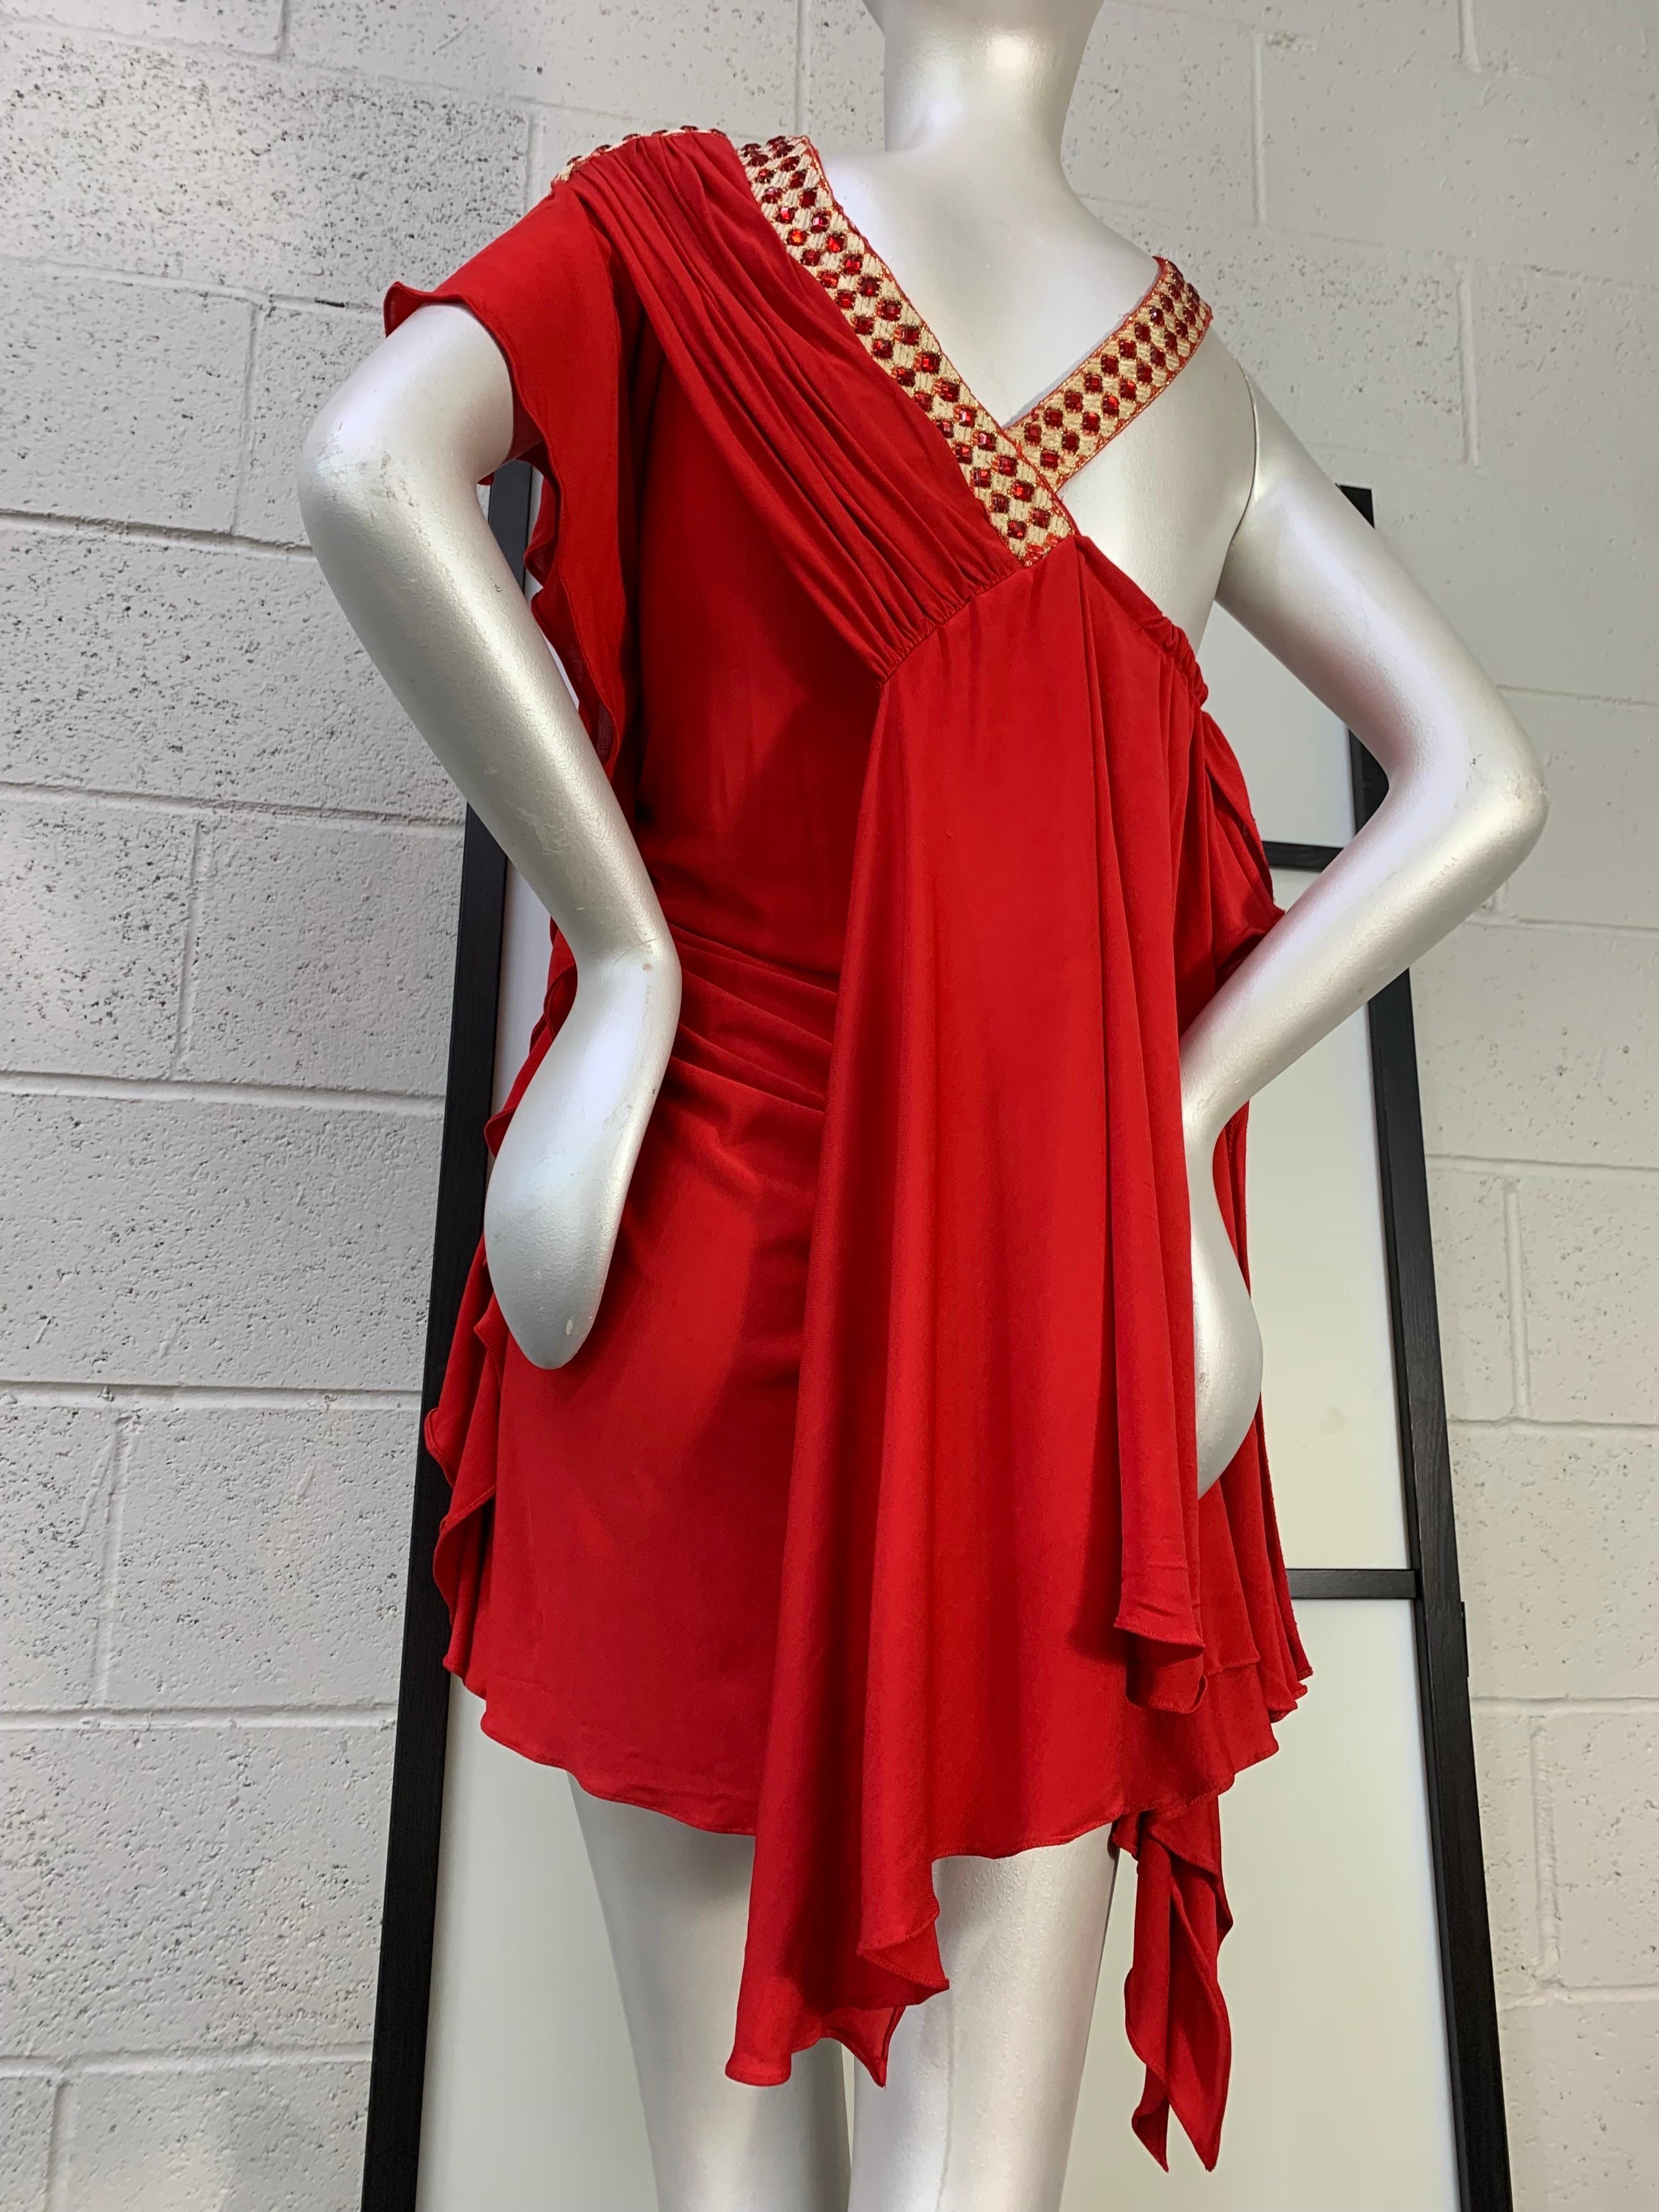 Torso Creations Red Matte Jersey Draped & Ruched Tango Dress w Rhinestone Trim In Excellent Condition For Sale In Gresham, OR